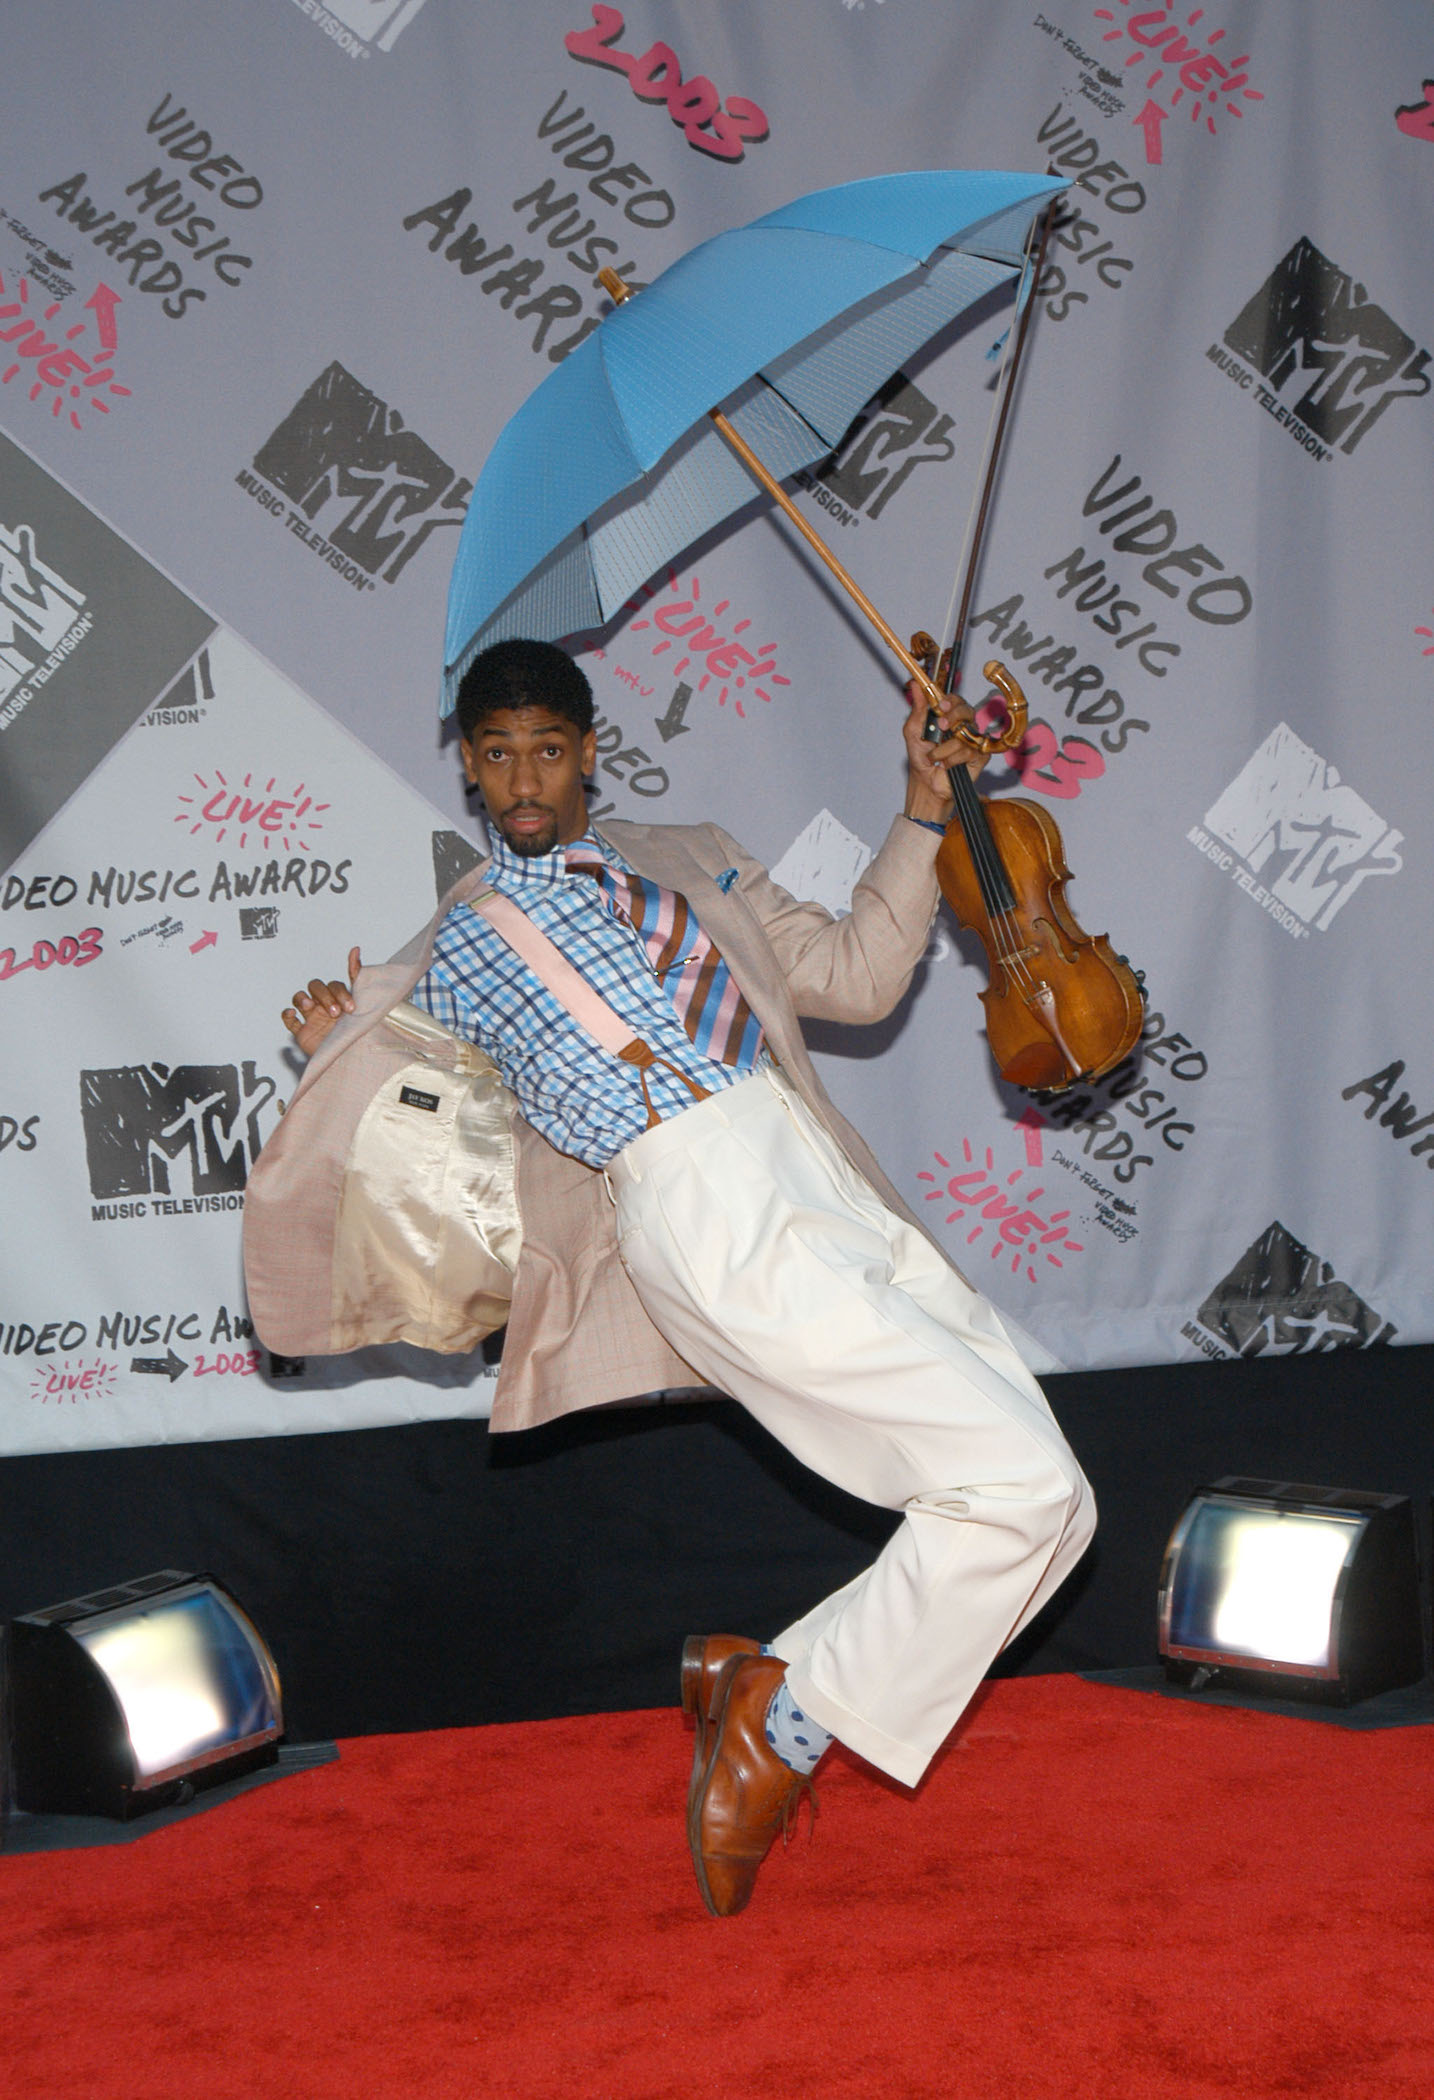 Diddy's assistant, Fonzworth Bentley, posing on his toes and holding an umbrella over his head on the red carpet